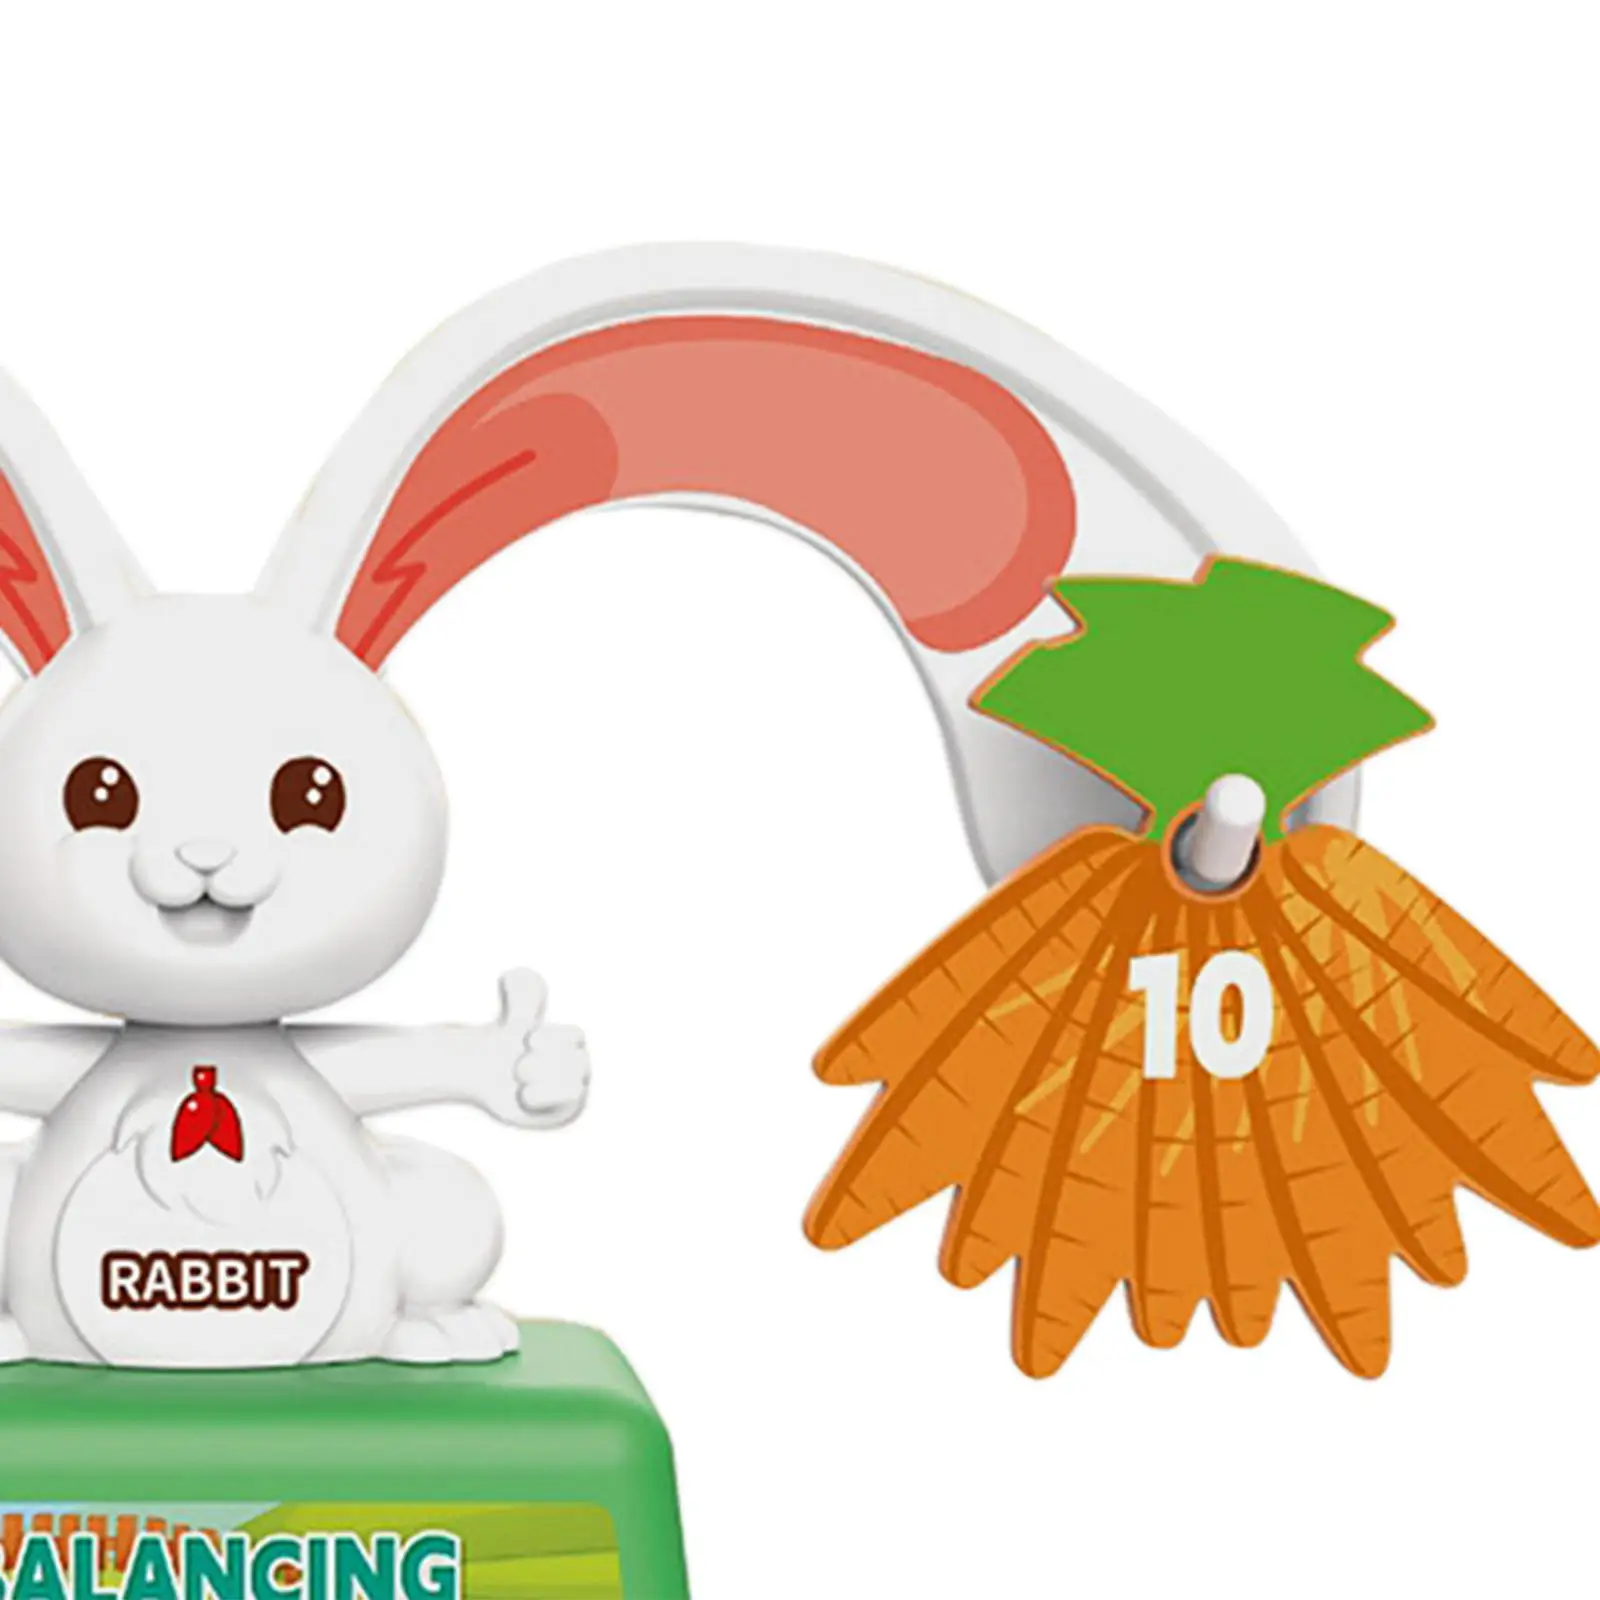 Rabbit Balance Counting Game Weight Cognition Math Subtracting and Addition for Homeschool Birthday Gift Kids Preschoolers